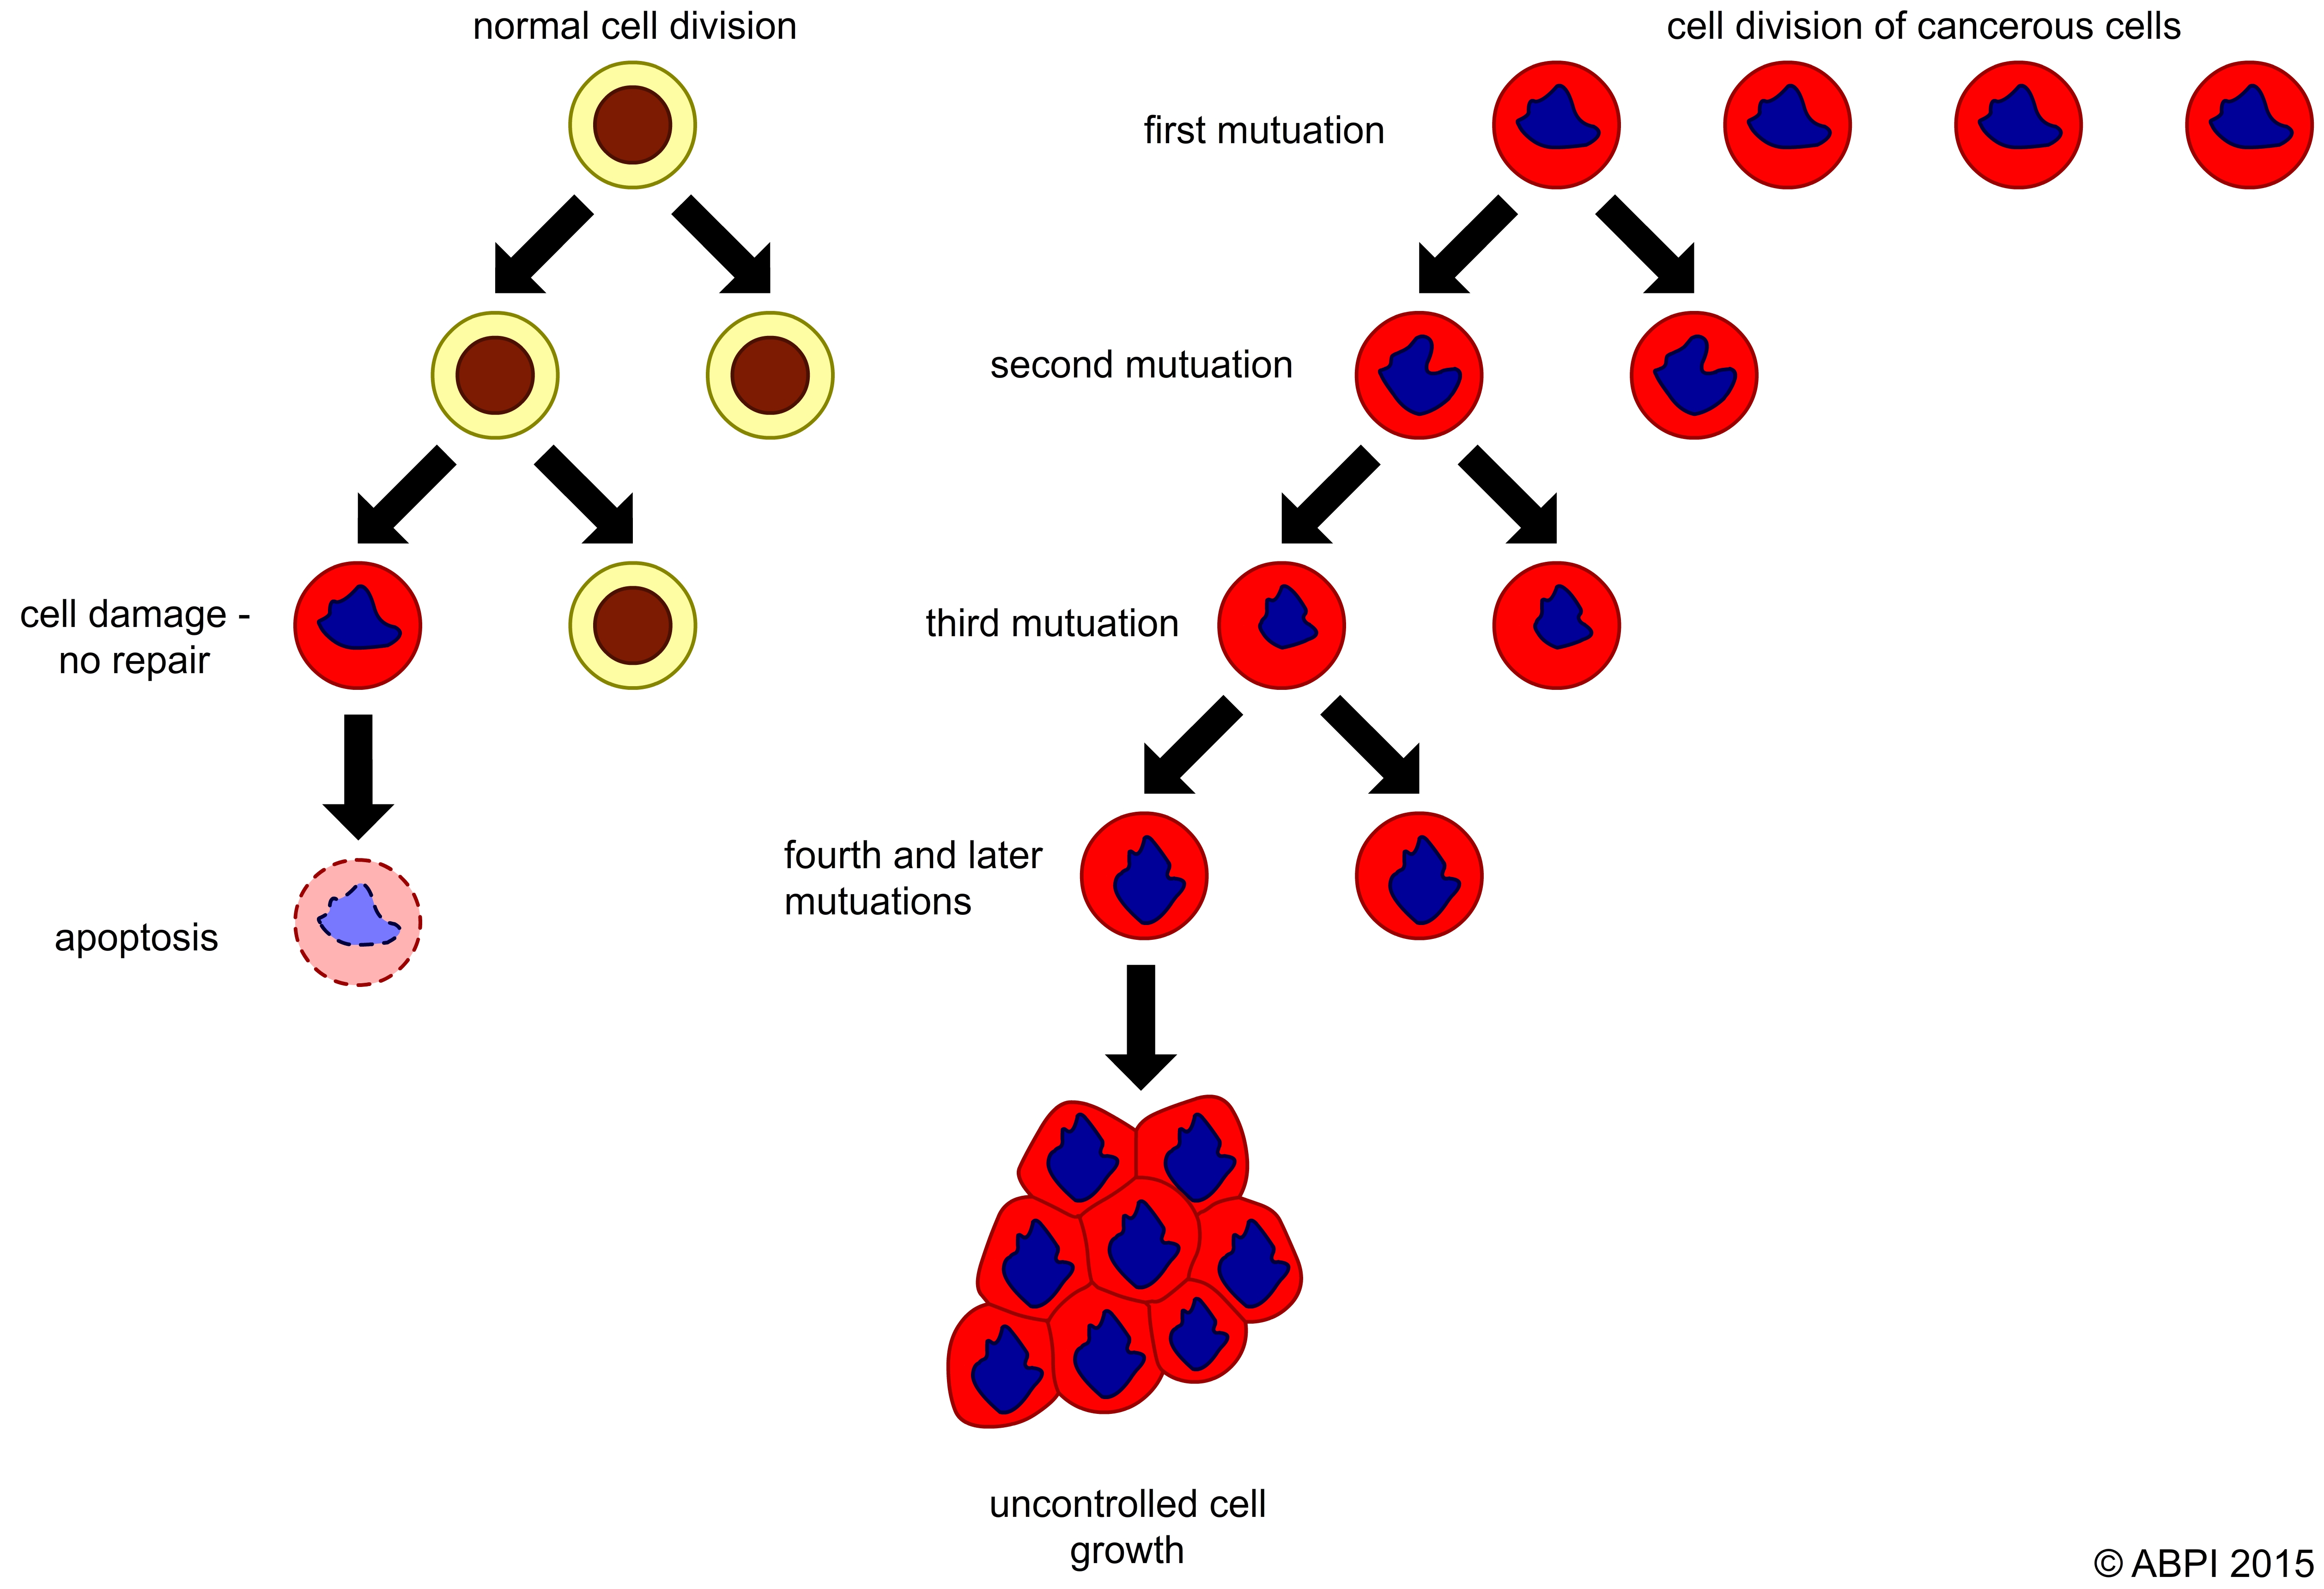 Normal Cell Division And Development Of Cancer